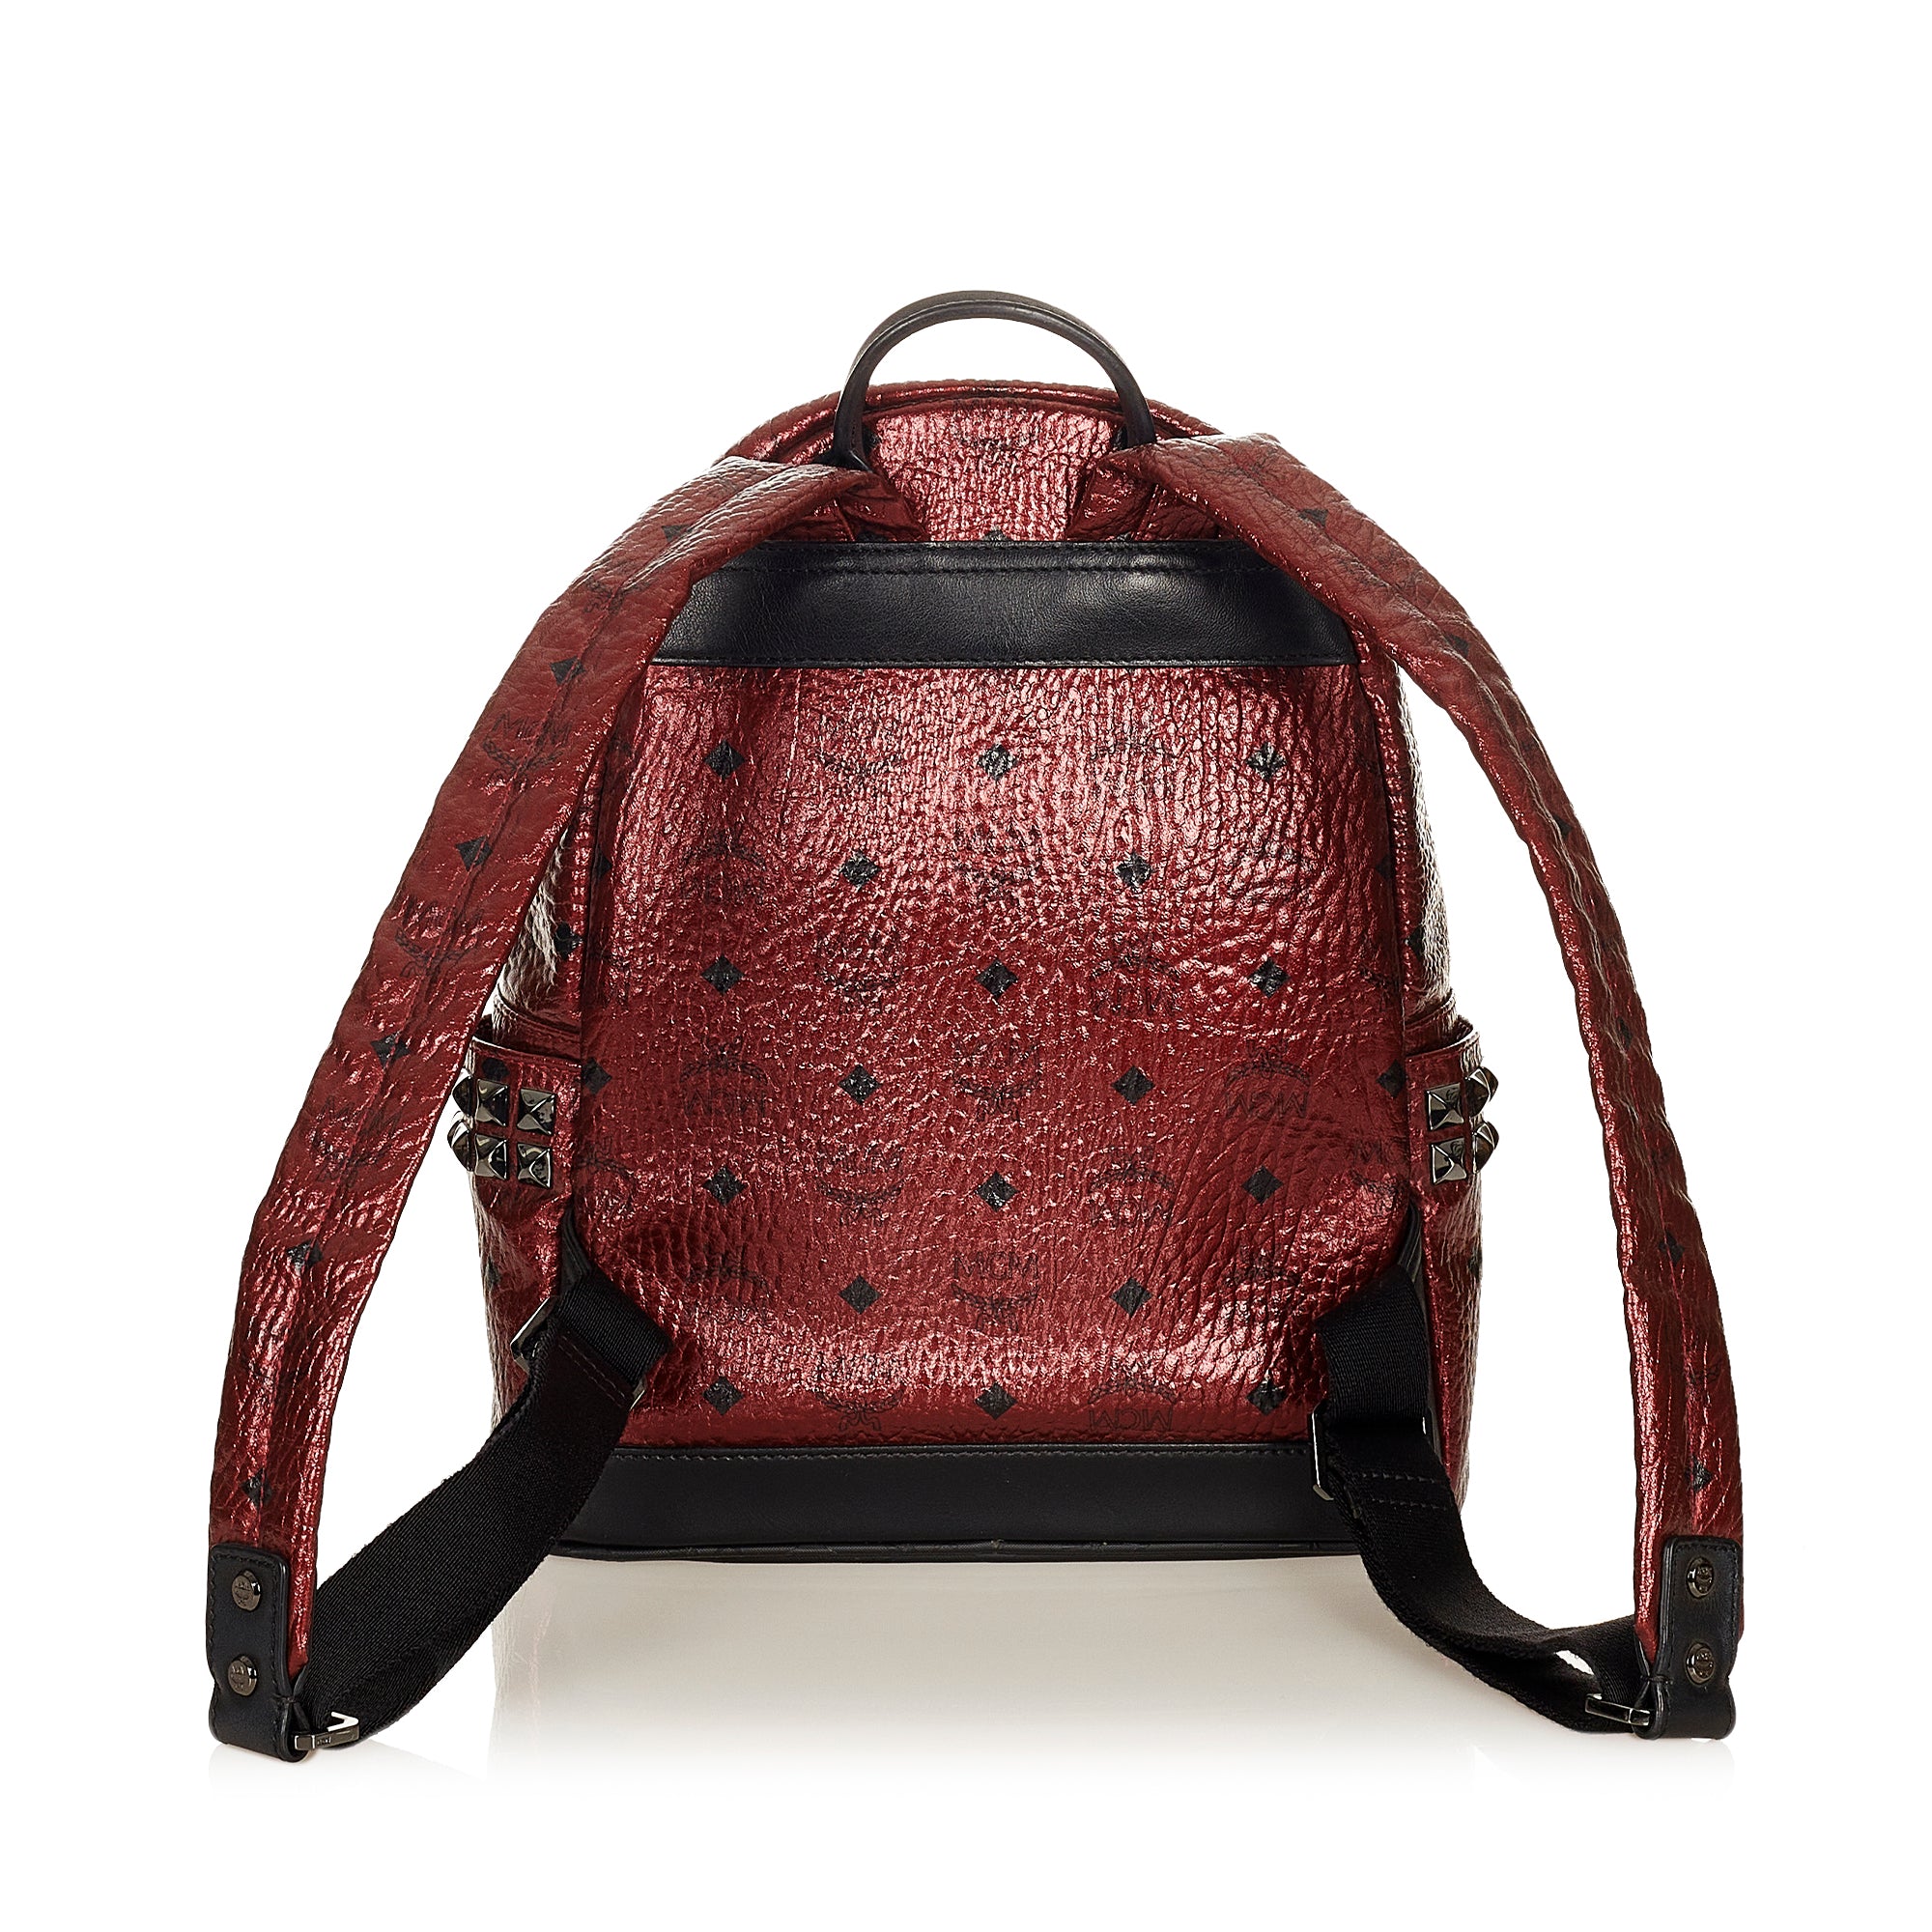 MCM Blue/Red Leather Backpack – RCR Luxury Boutique